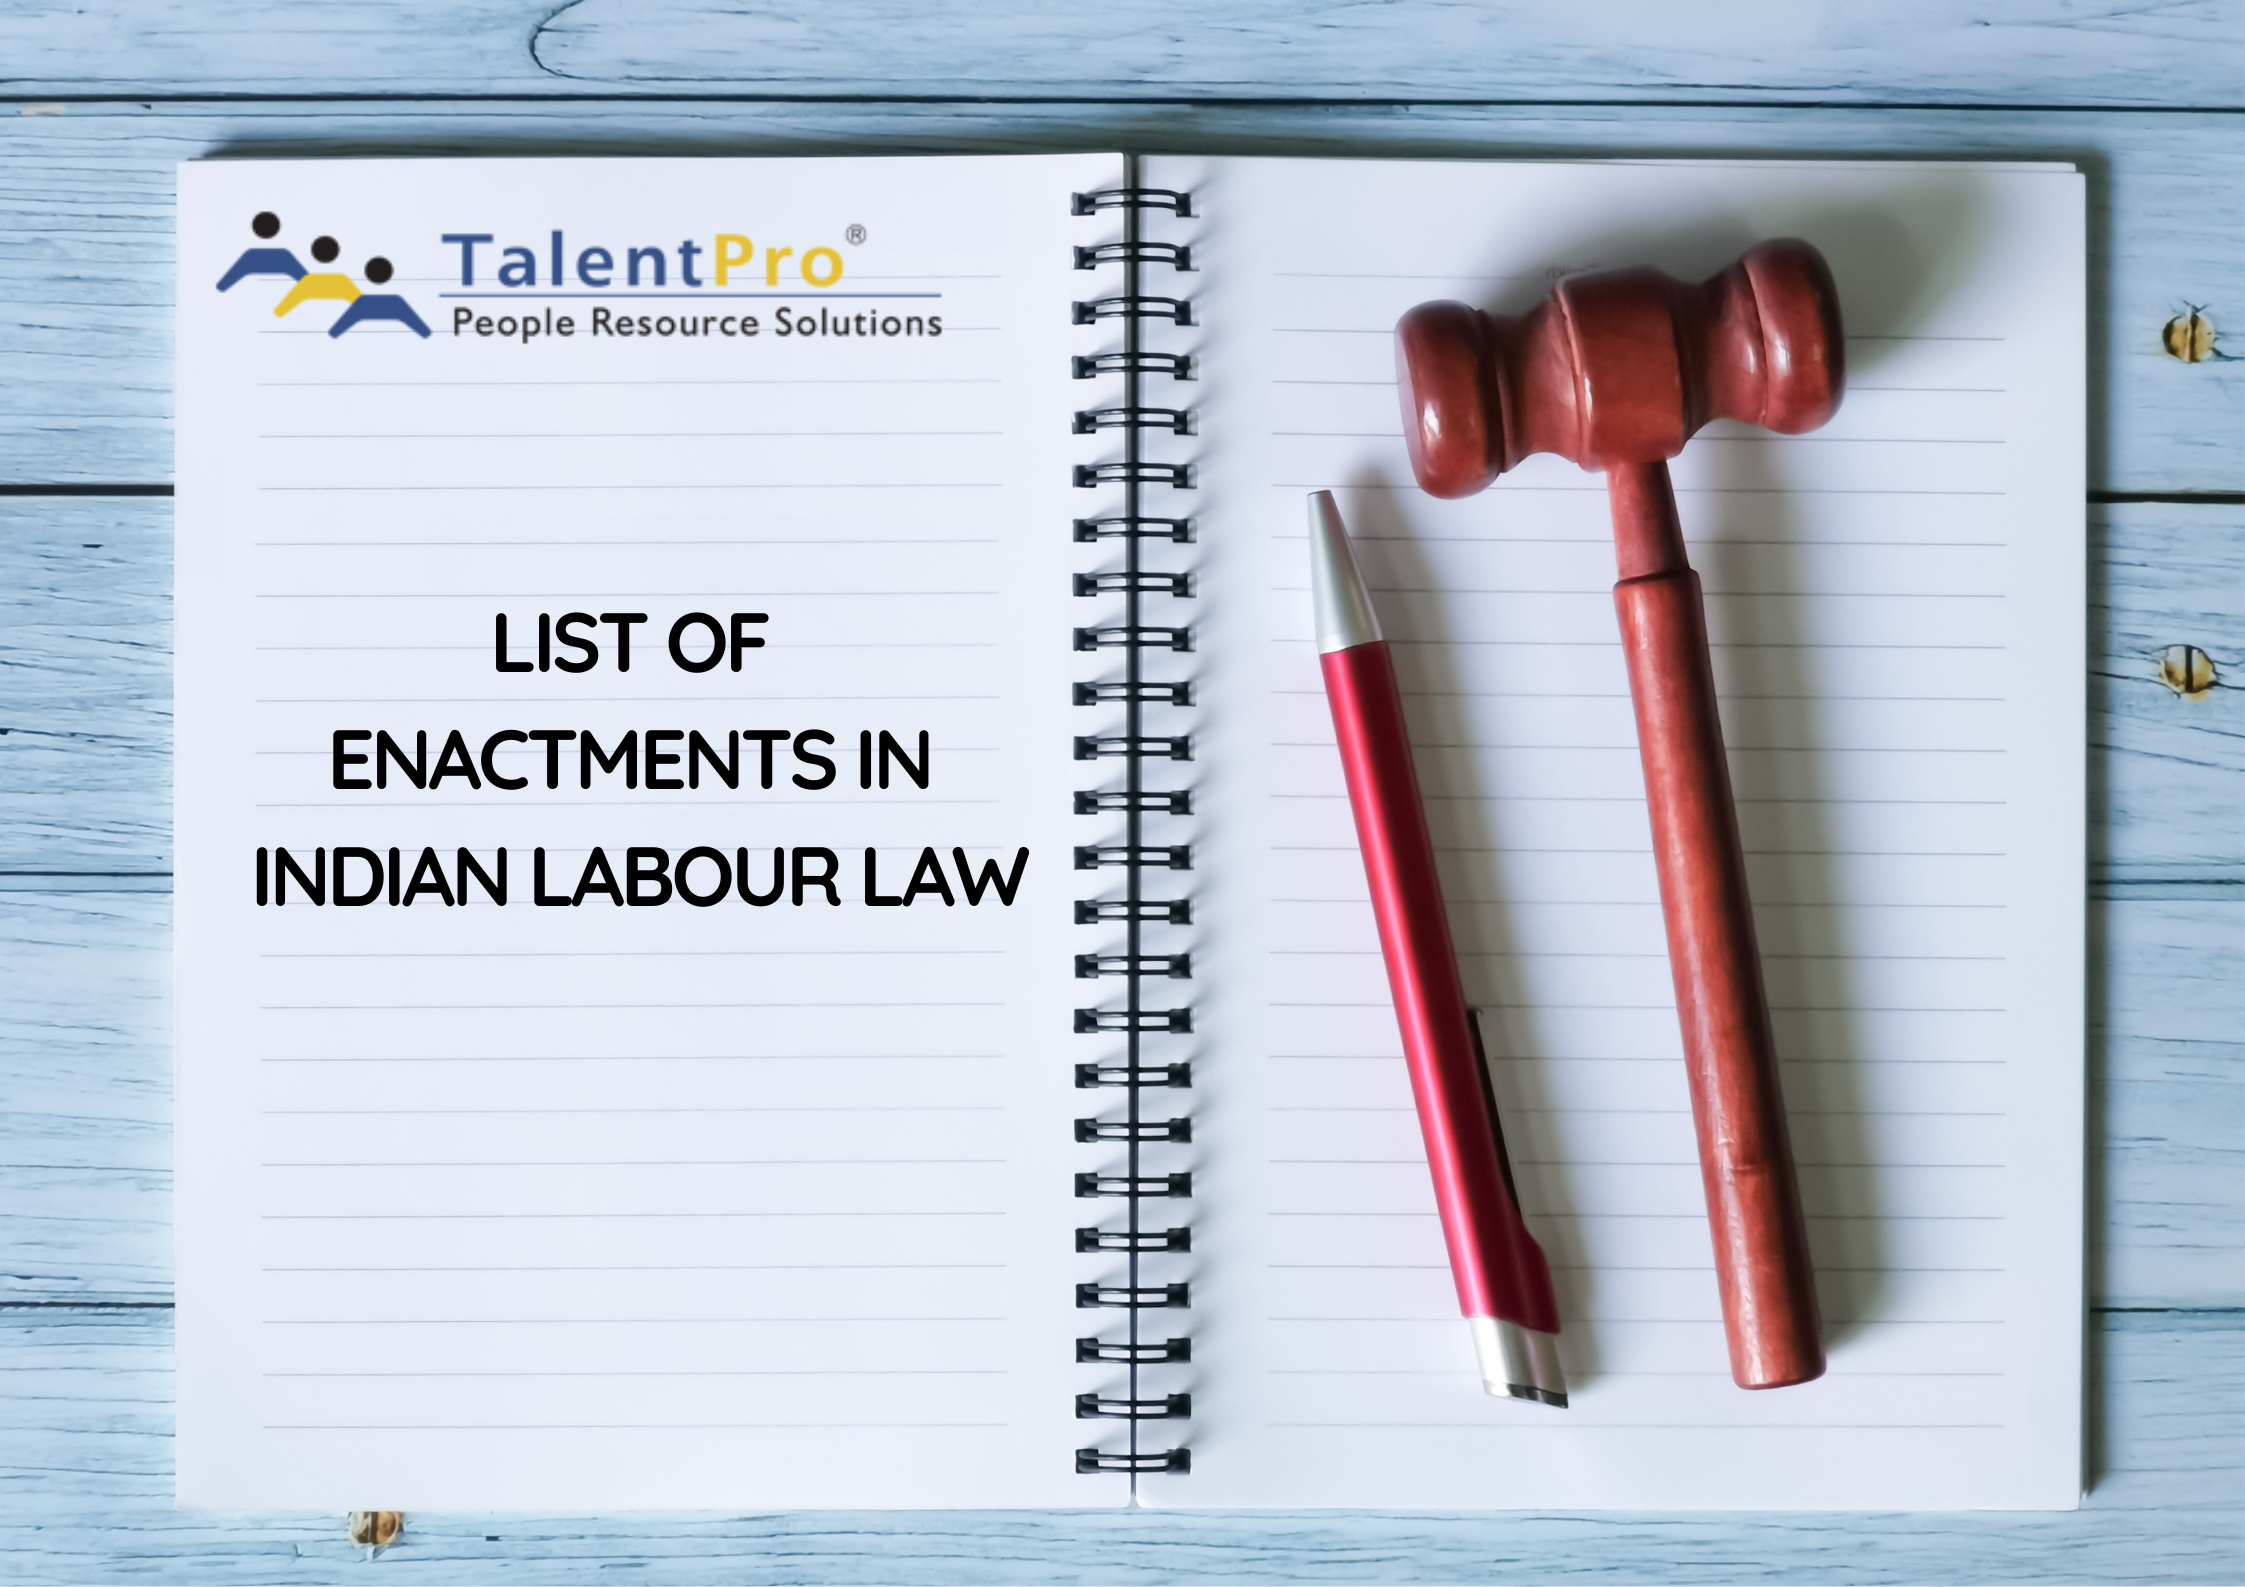 LIST-OF-ENACTMENTS-IN-INDAN-LABOUR-LAW